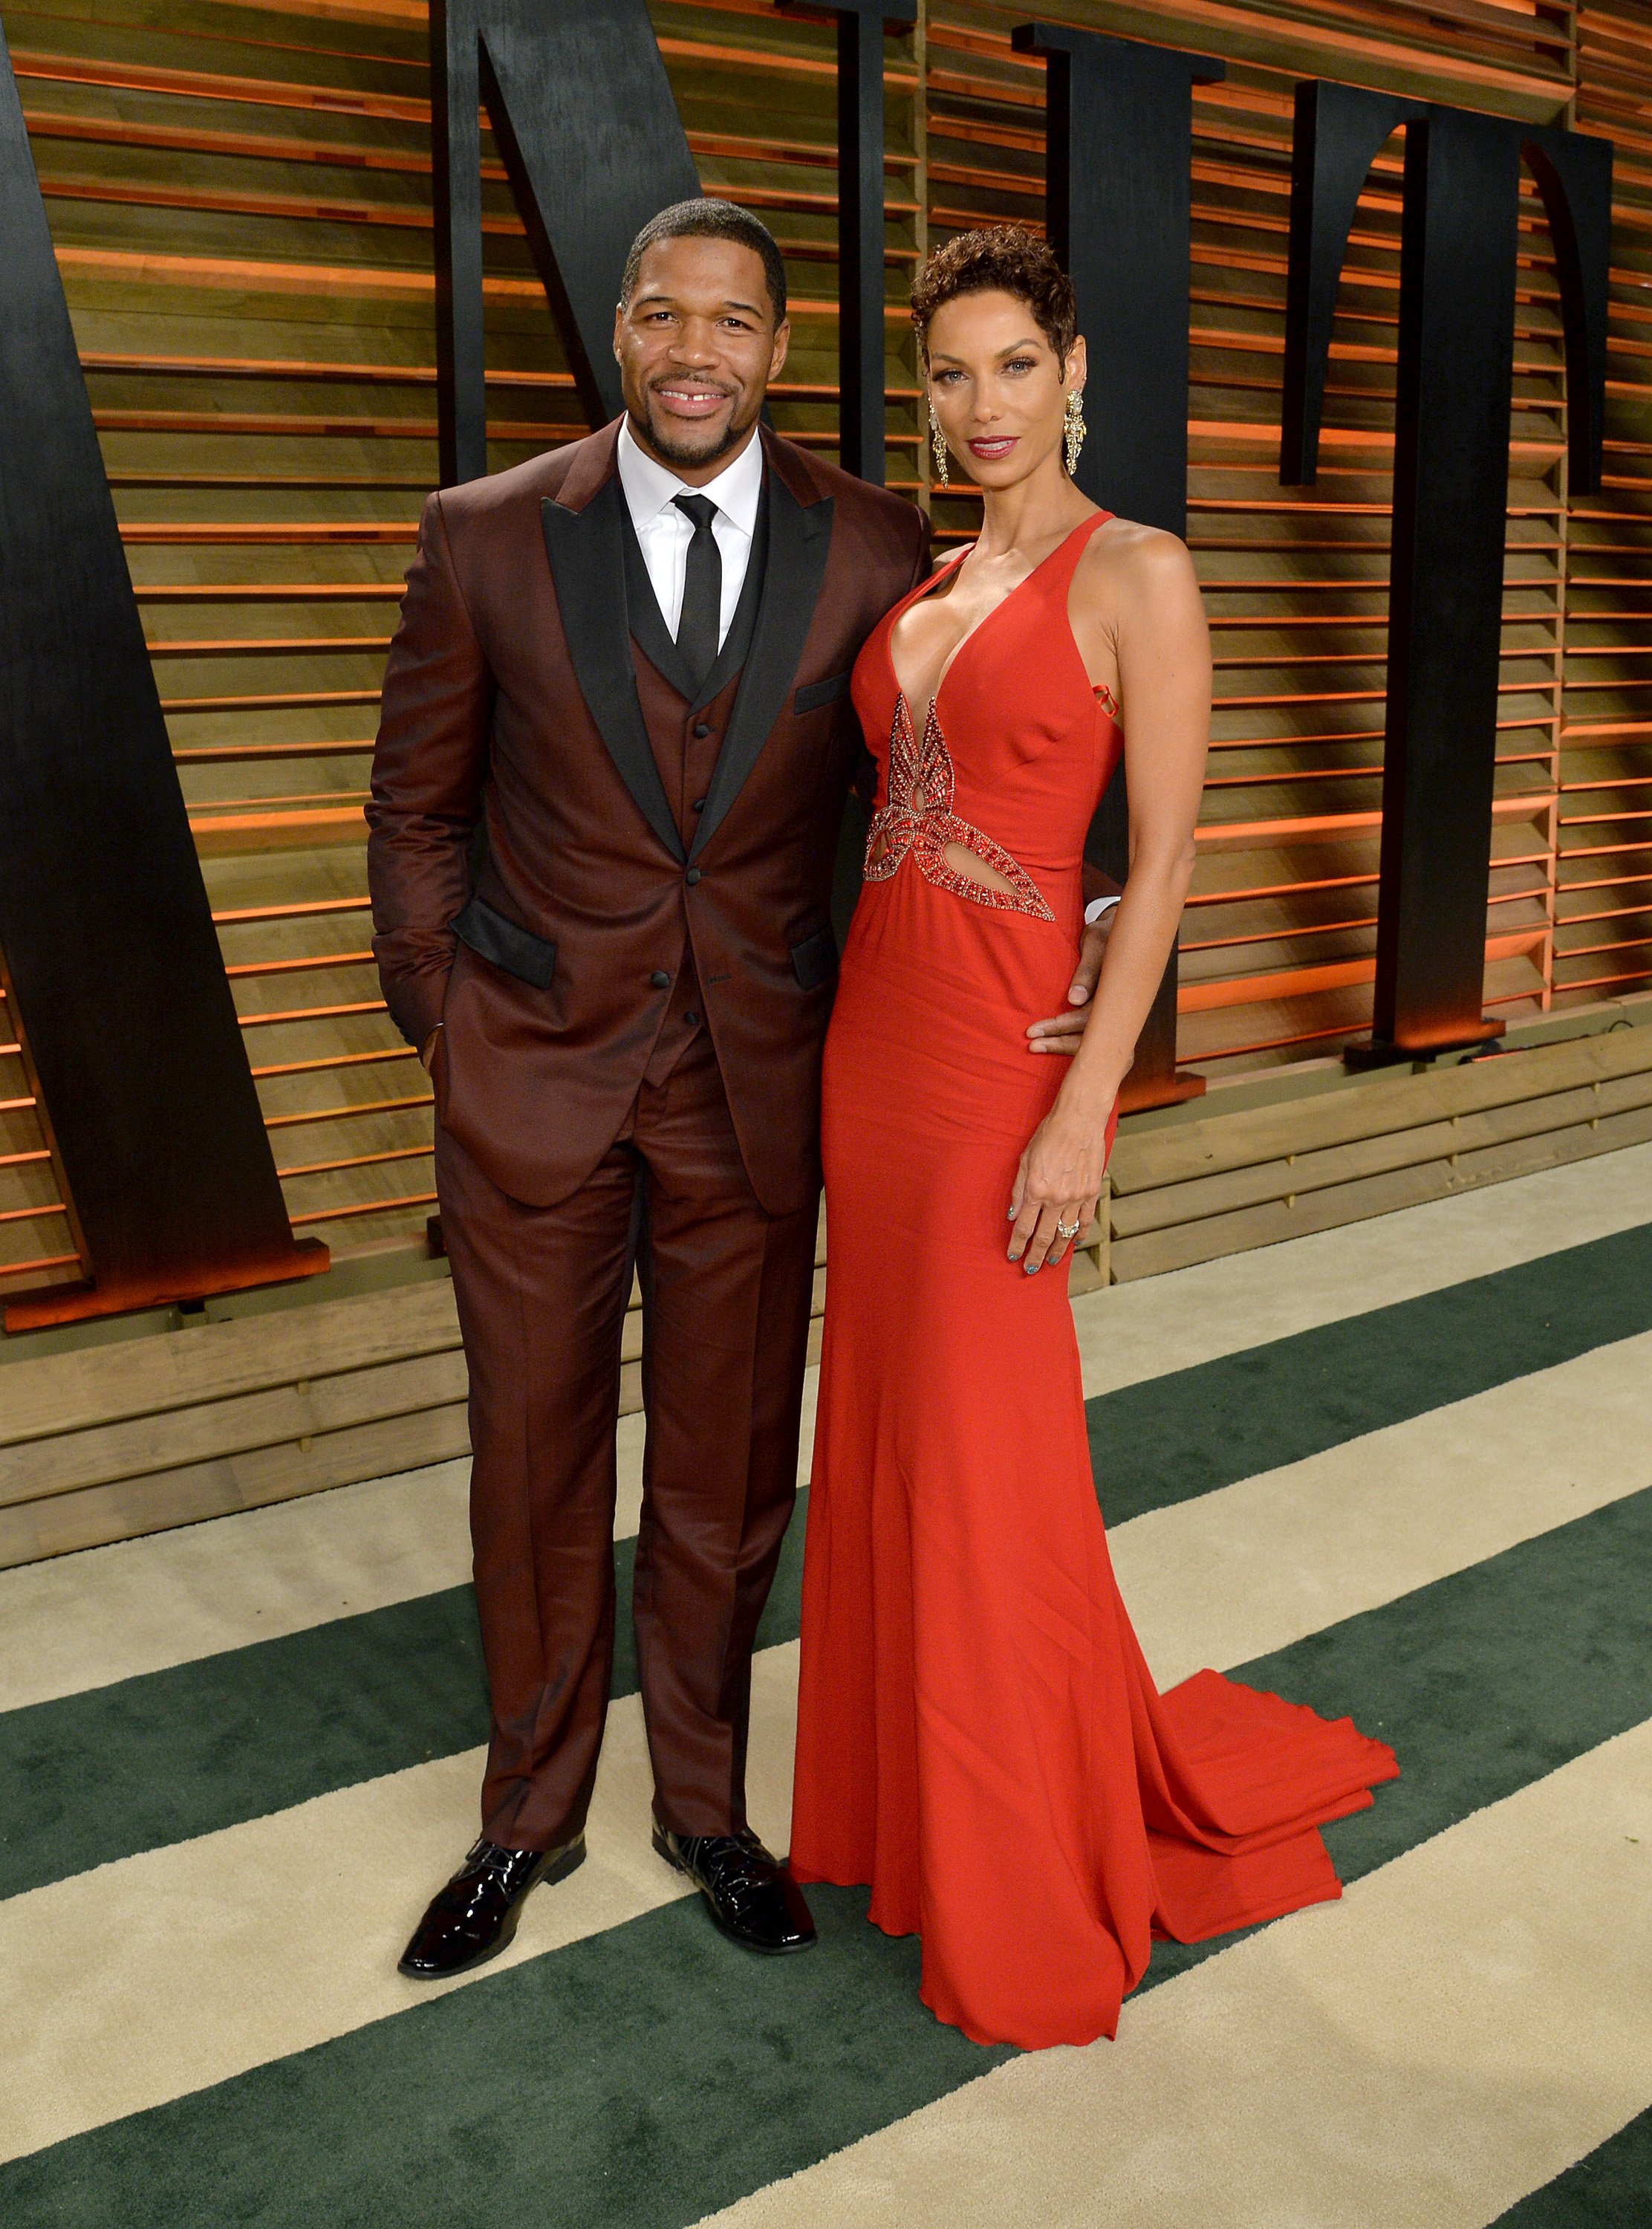 Michael Strahan and Nicole Murphy attend the 2014 Vanity Fair Oscar Party, 2014, West Hollywood, California. | Photo: Getty Images